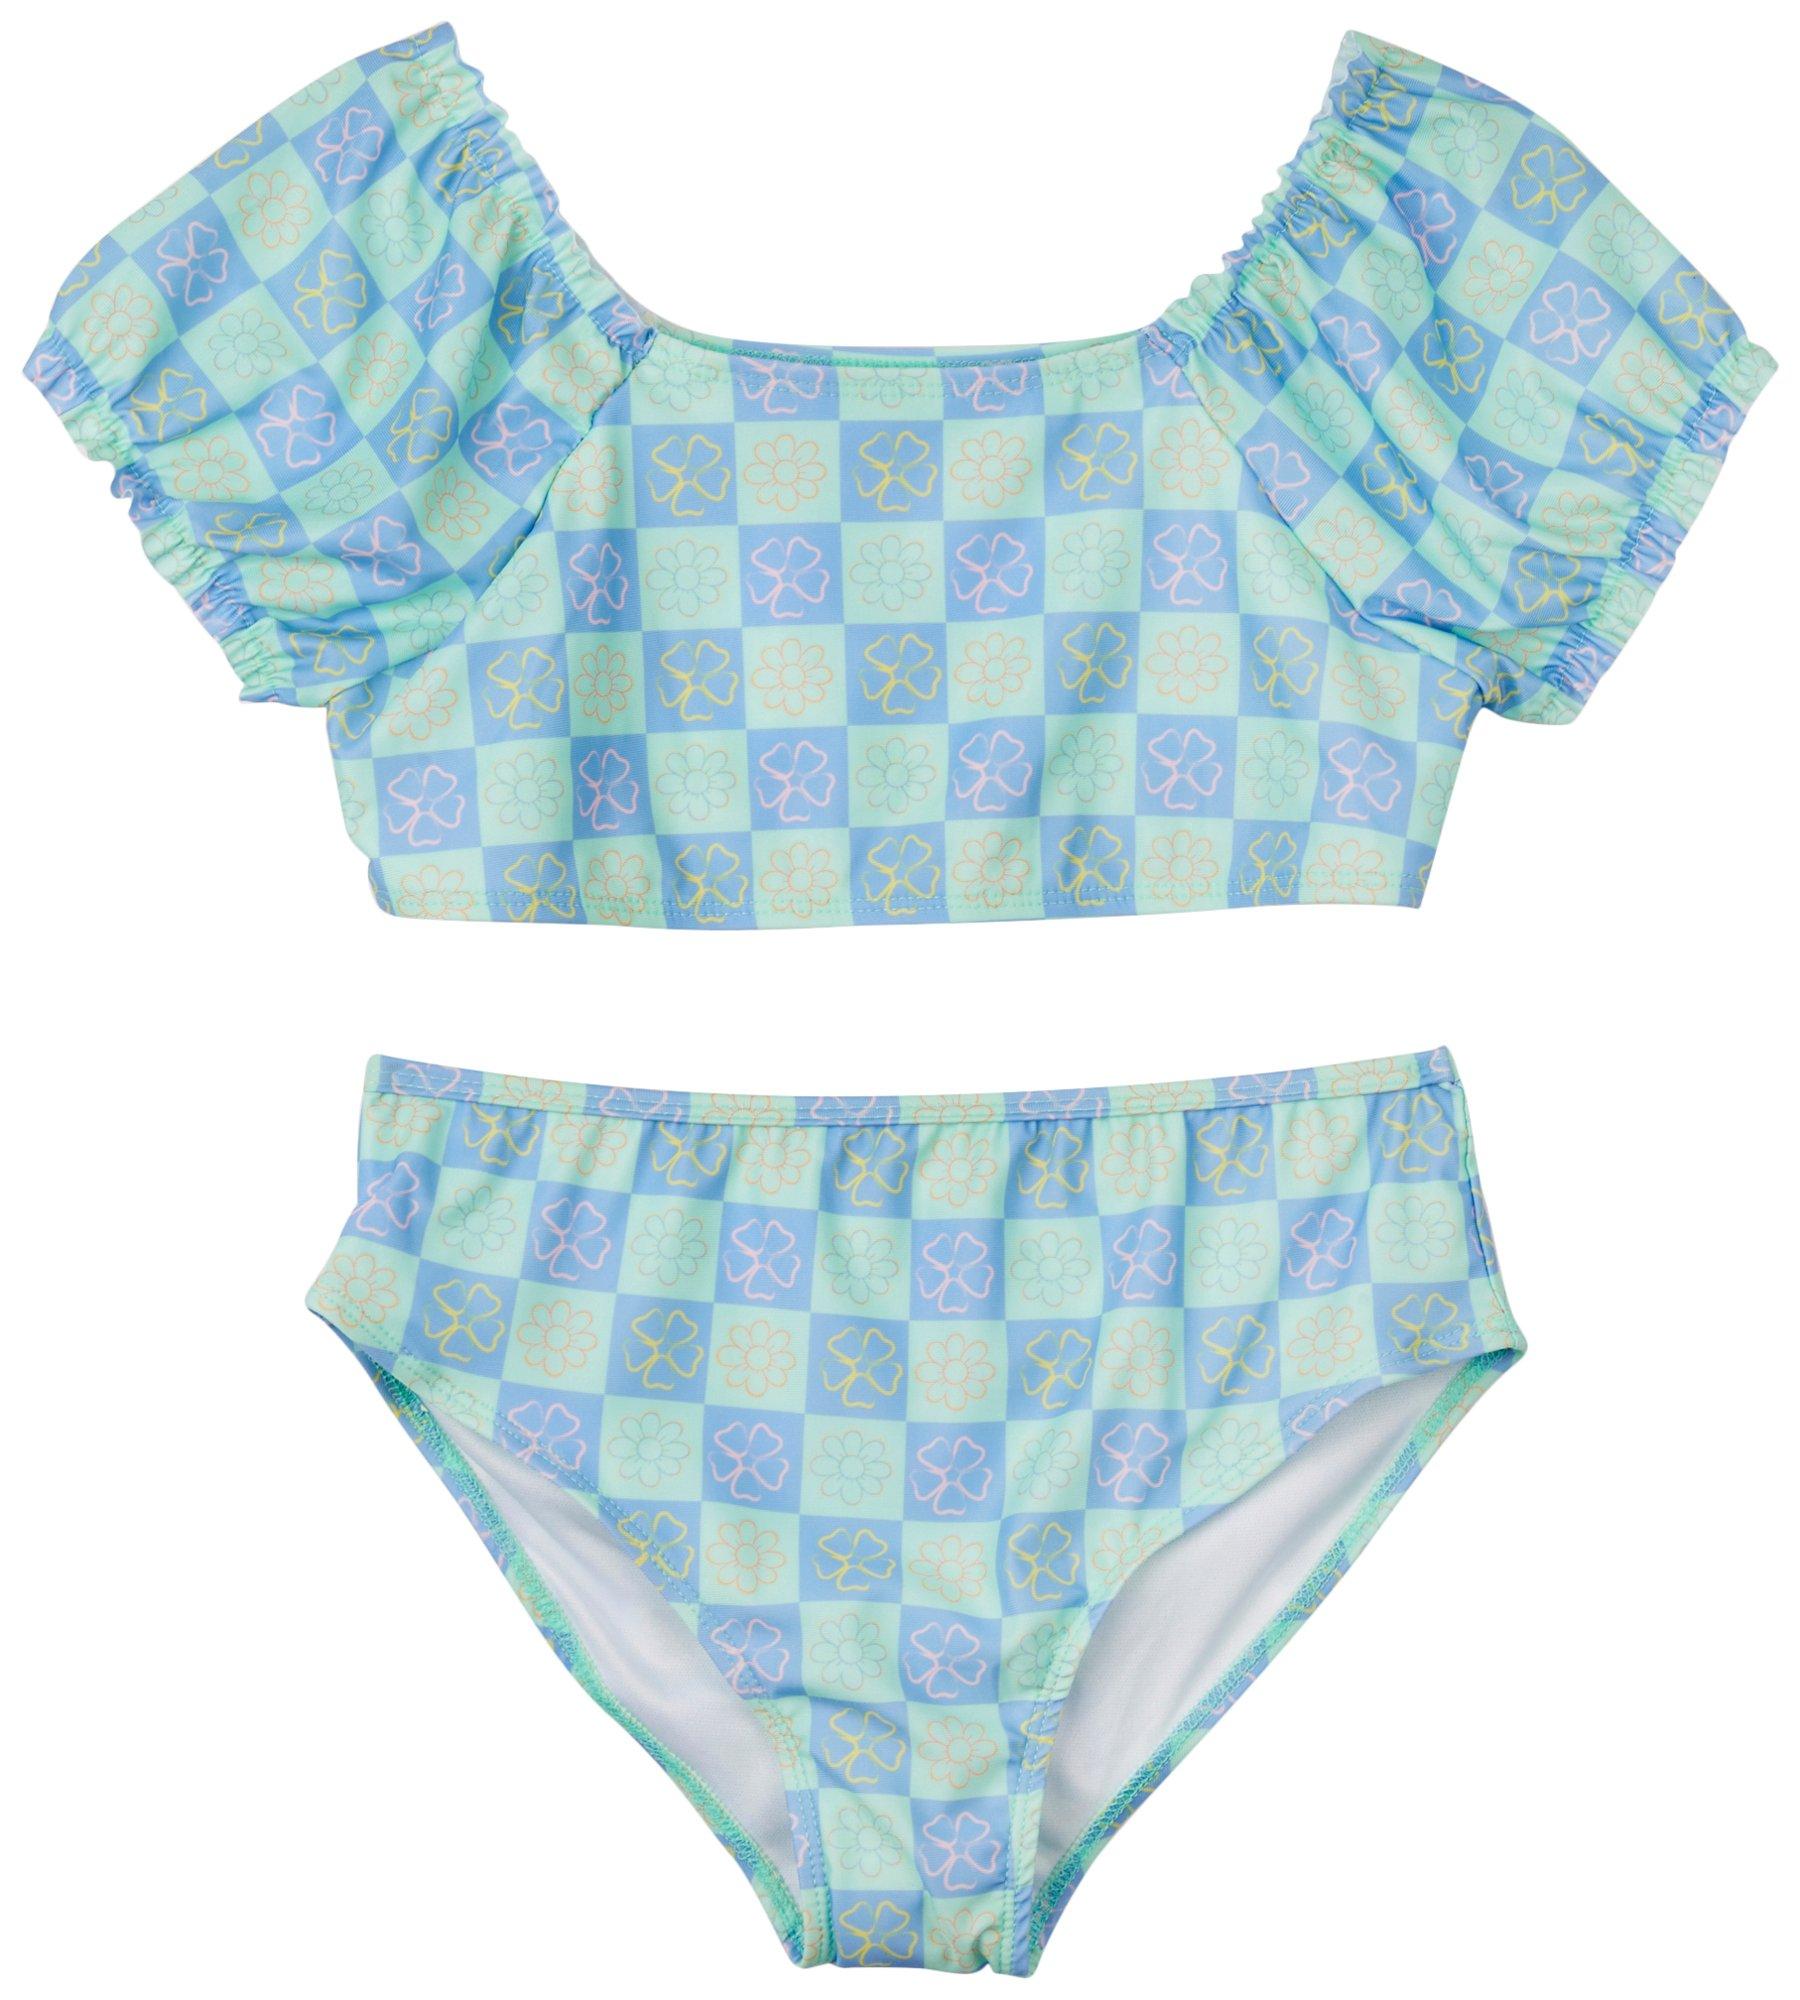 Big Girls 2-Pc. Floral Checkered Swimsuit Set